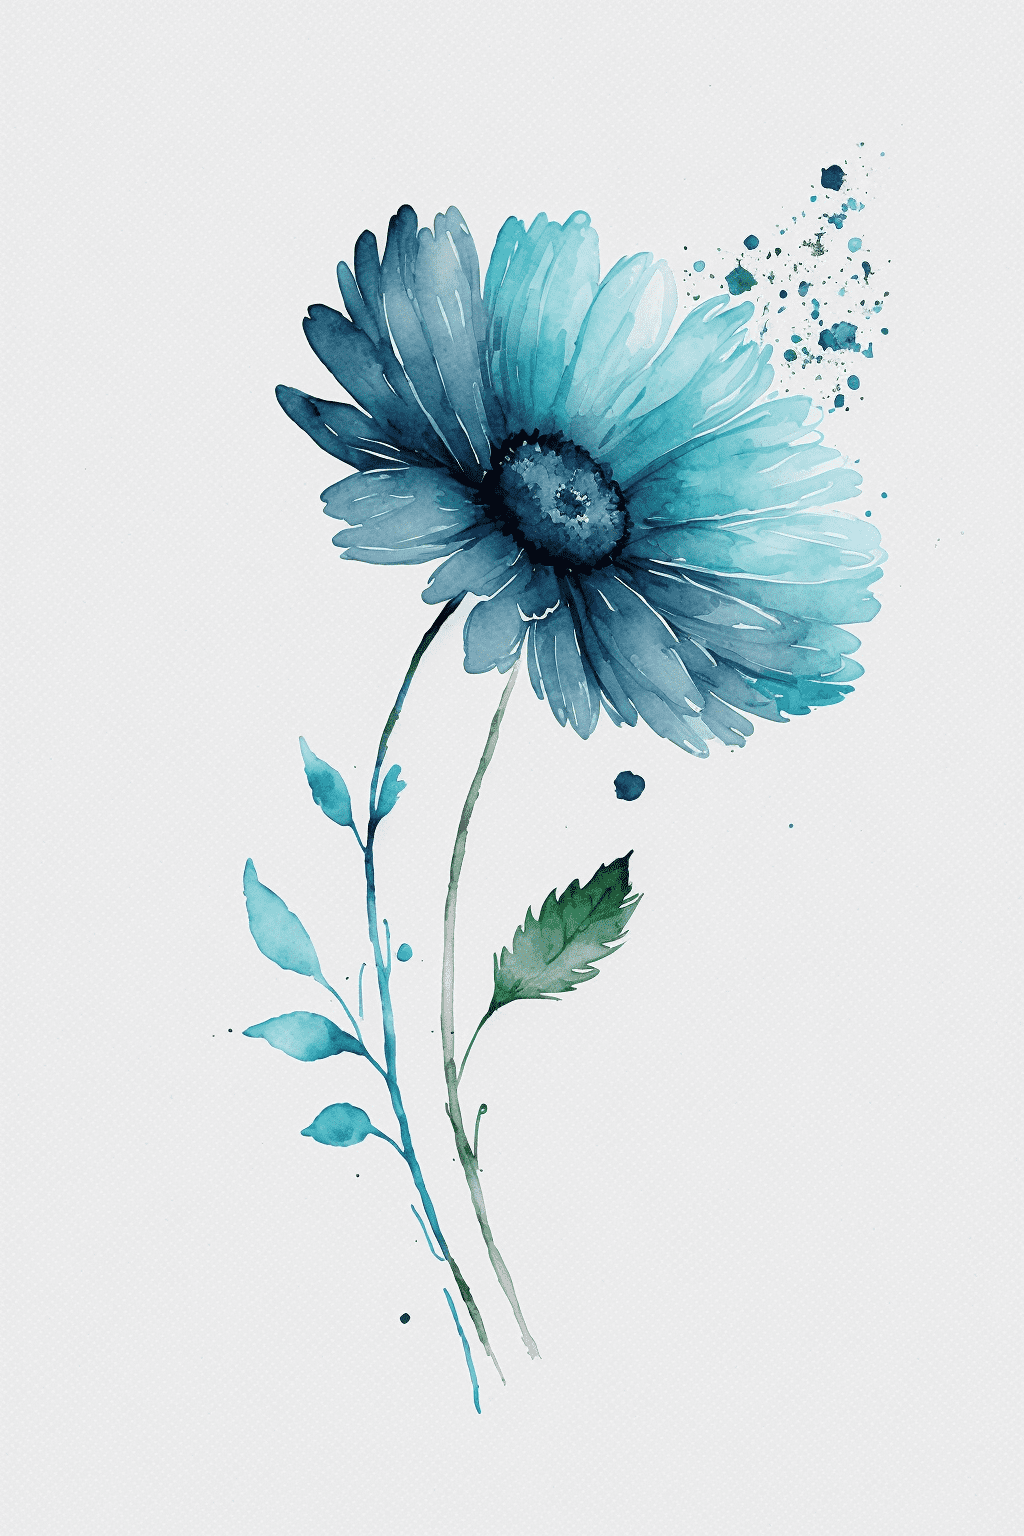 Poppy Flowers Watercolor Painting Elegant Floral Art Design Square Art  Prints| Buy High-Quality Posters and Framed Posters Online - All in One  Place – PosterGully